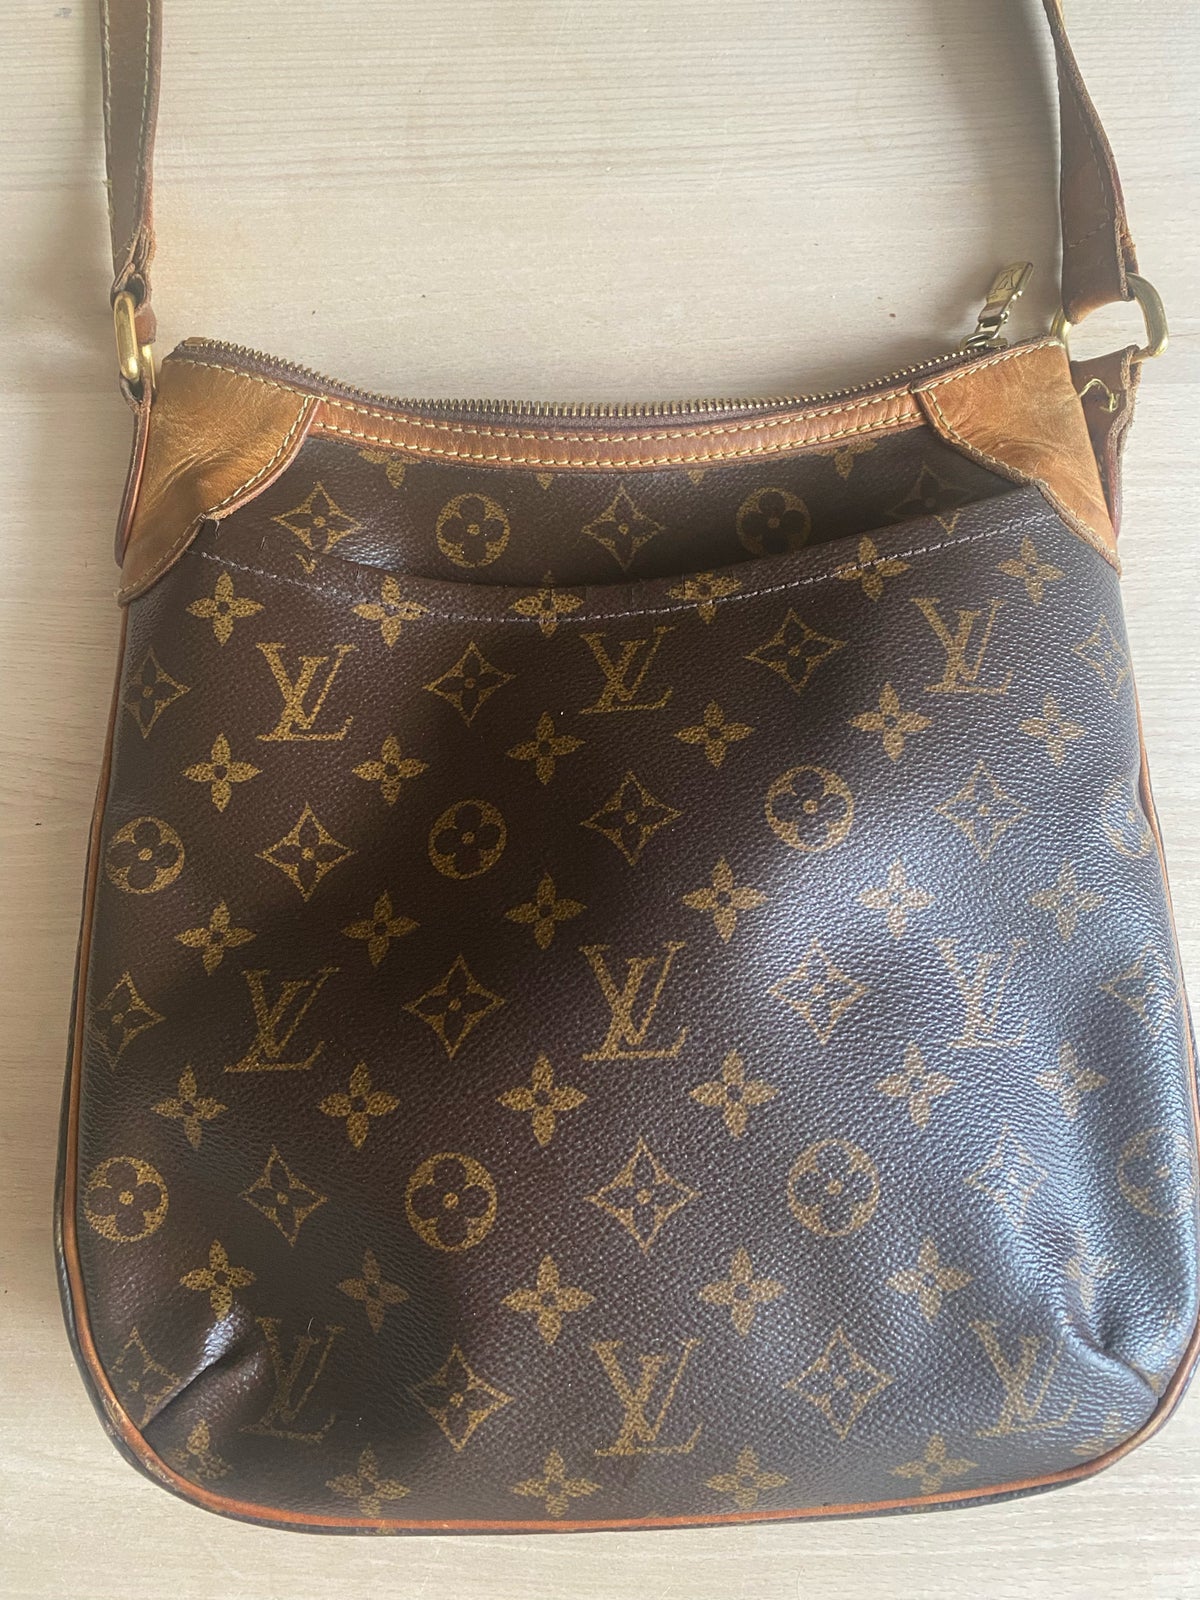 Crossbody, Louis Vuitton, andet materiale